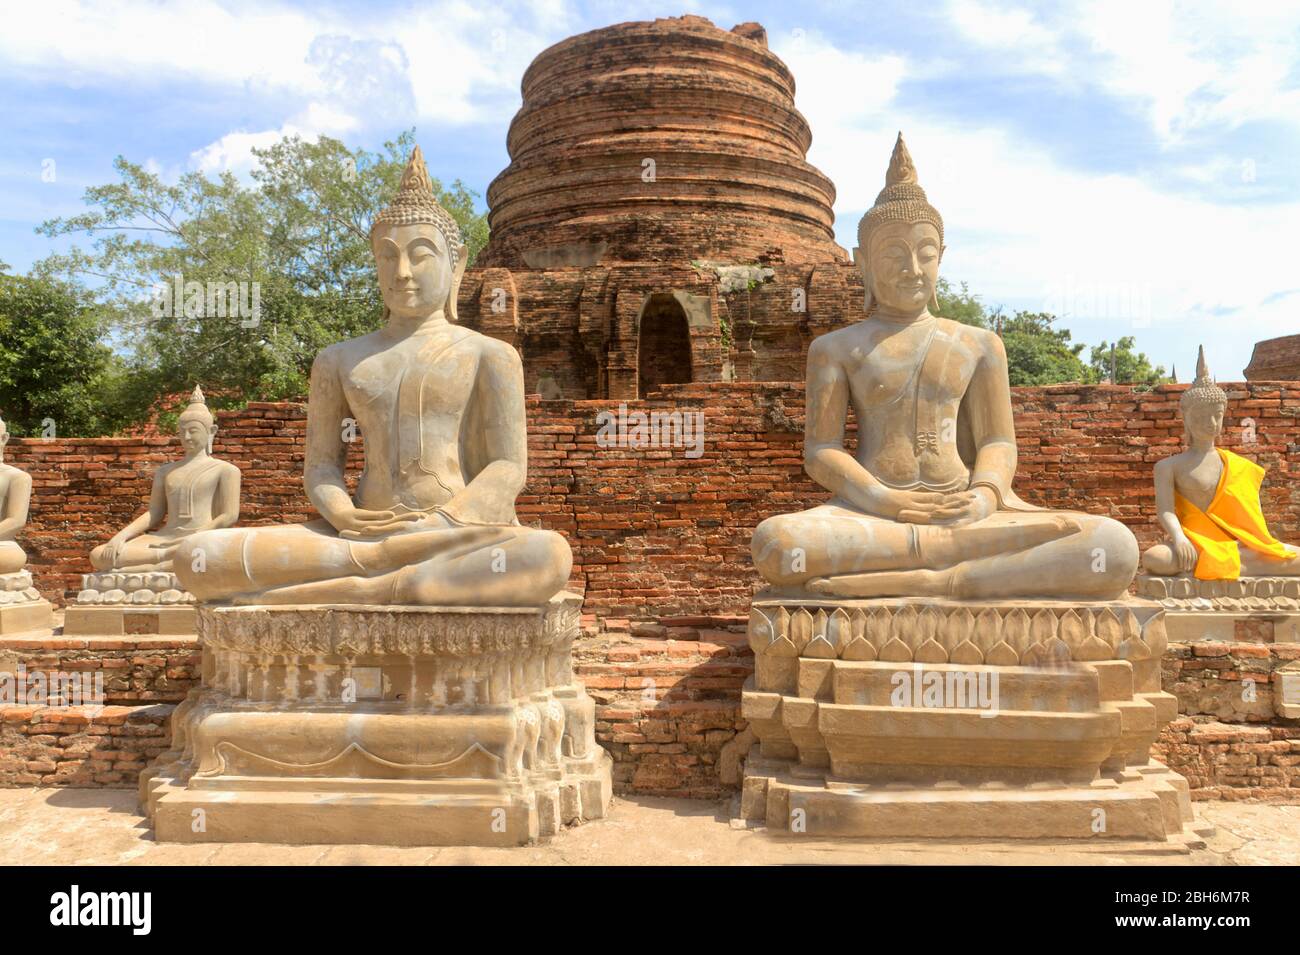 Buddha Statues in Ayuttaya  the ancient city and former capital of Siam, present day Thailand, Destroyed in a battle with Burma in 1767 Stock Photo